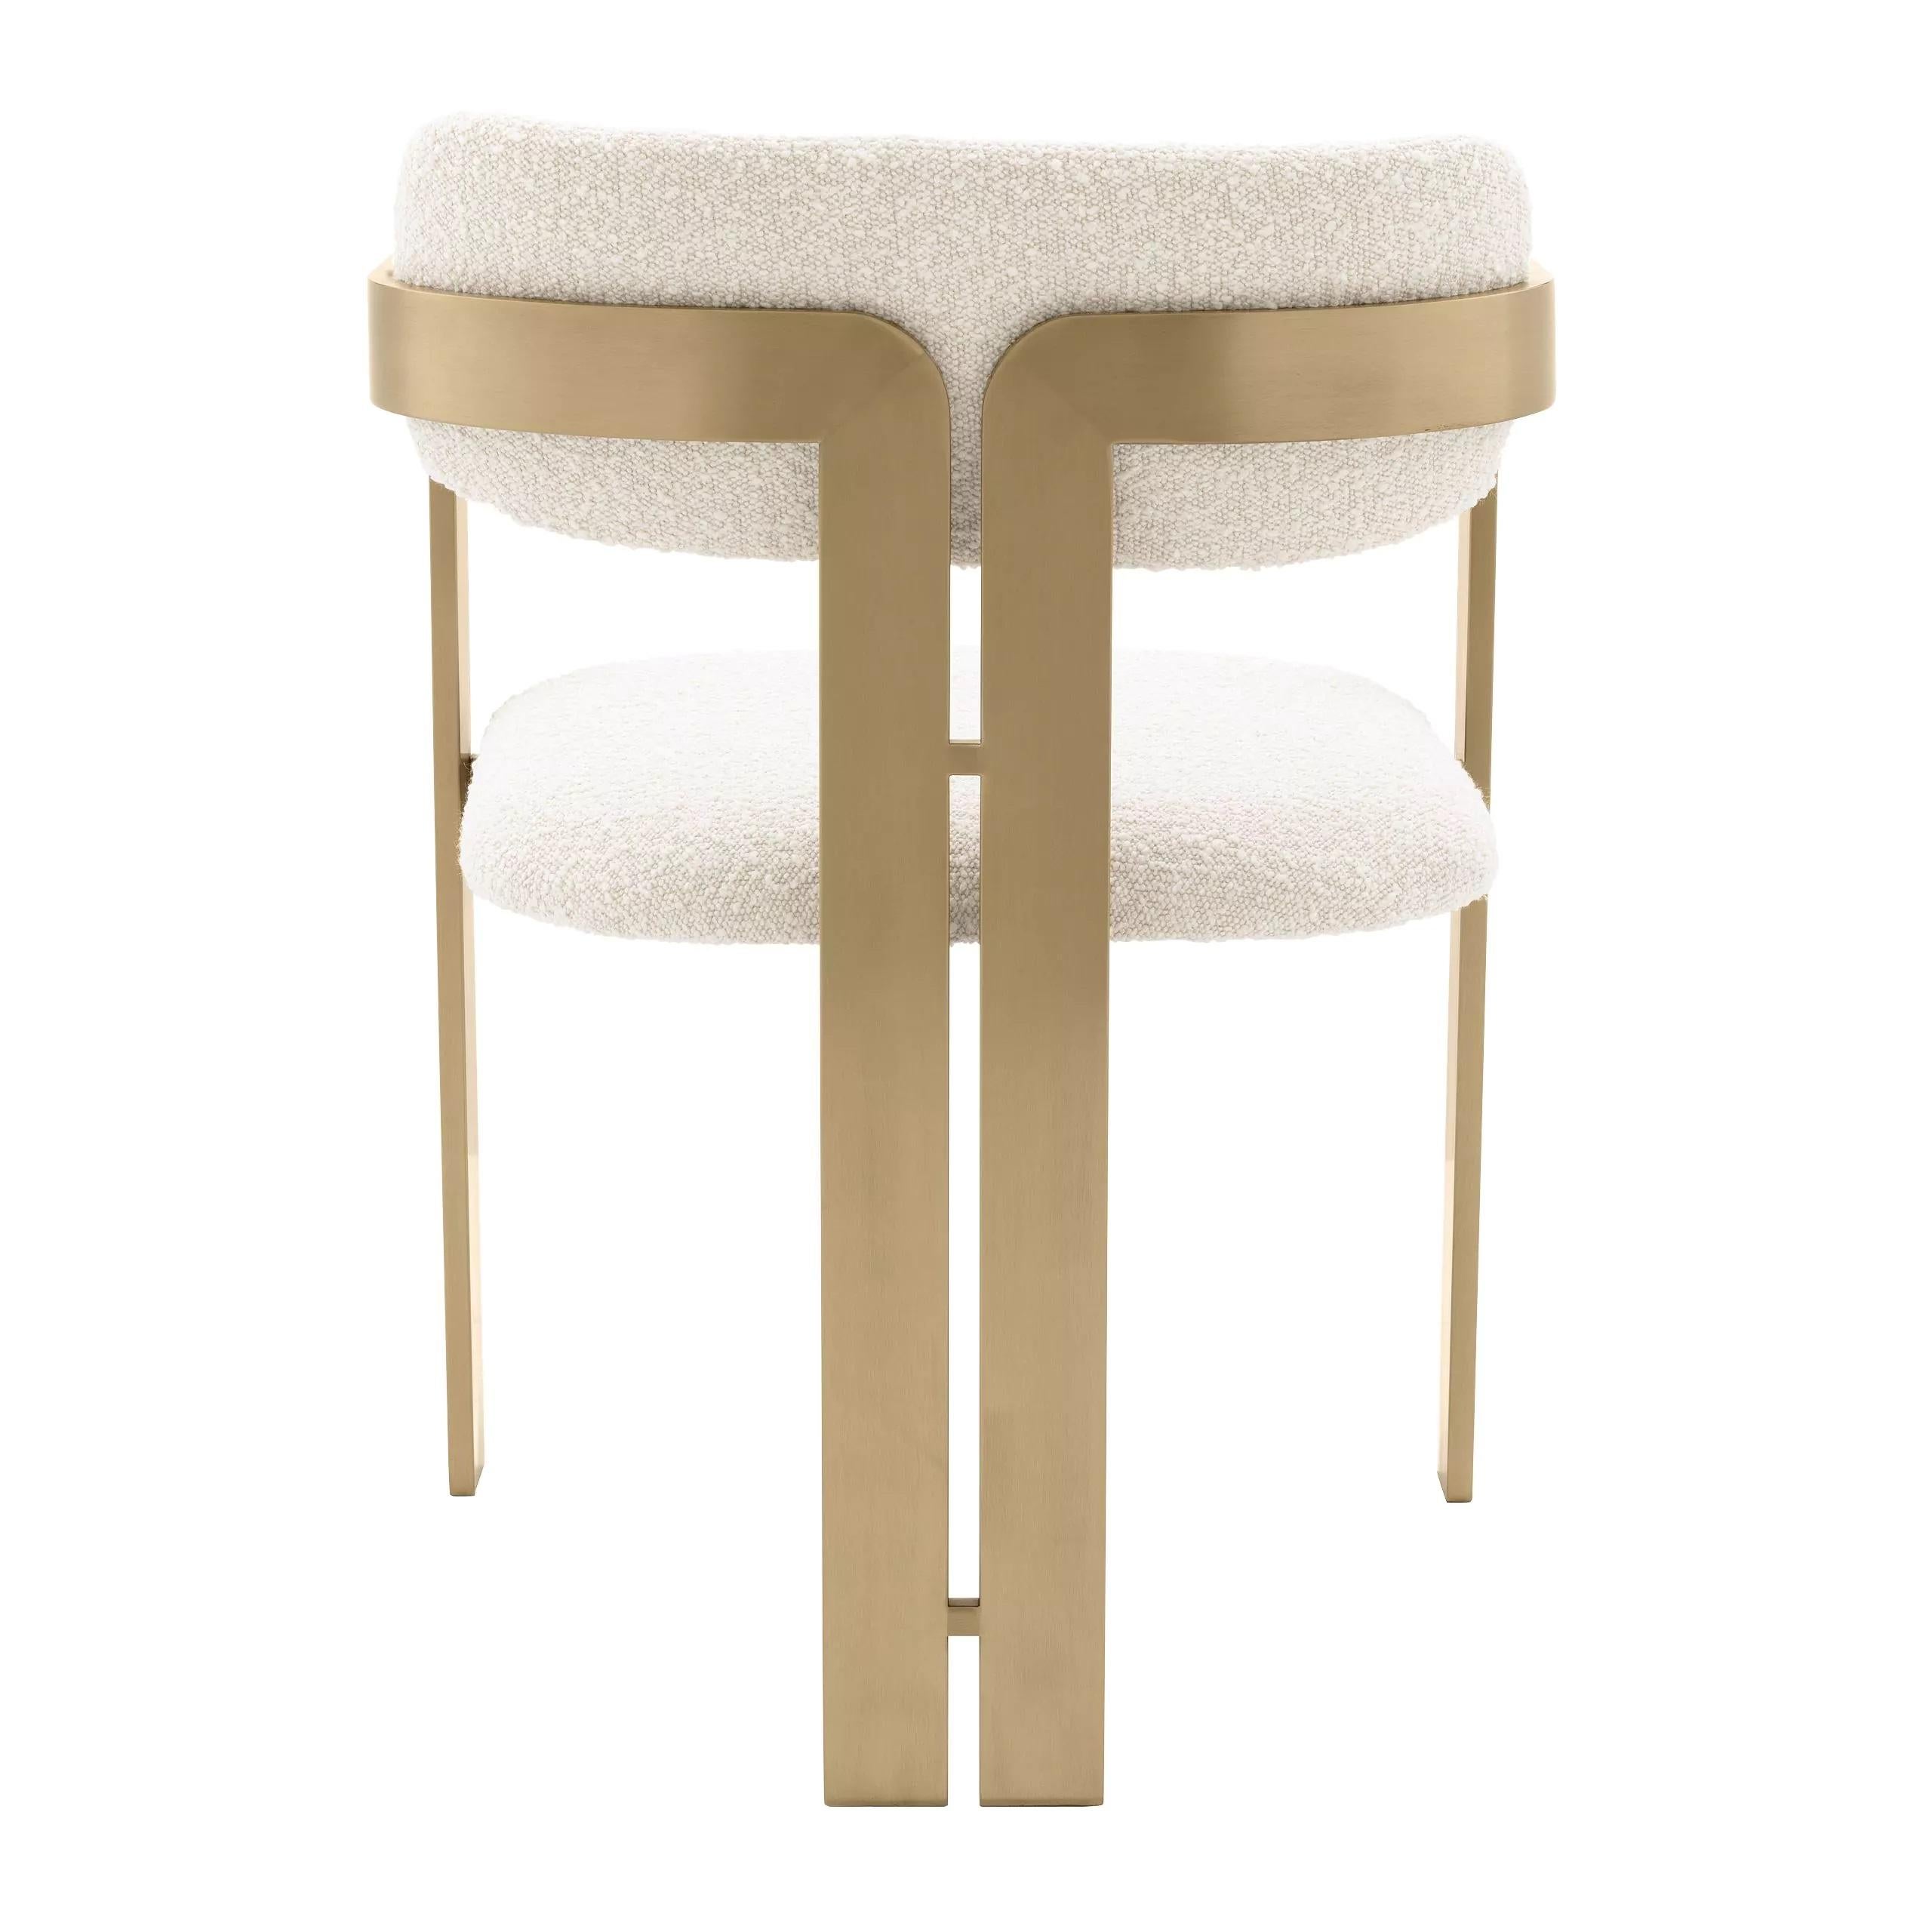 Beige Bouclé fabric and brass finishes chair.